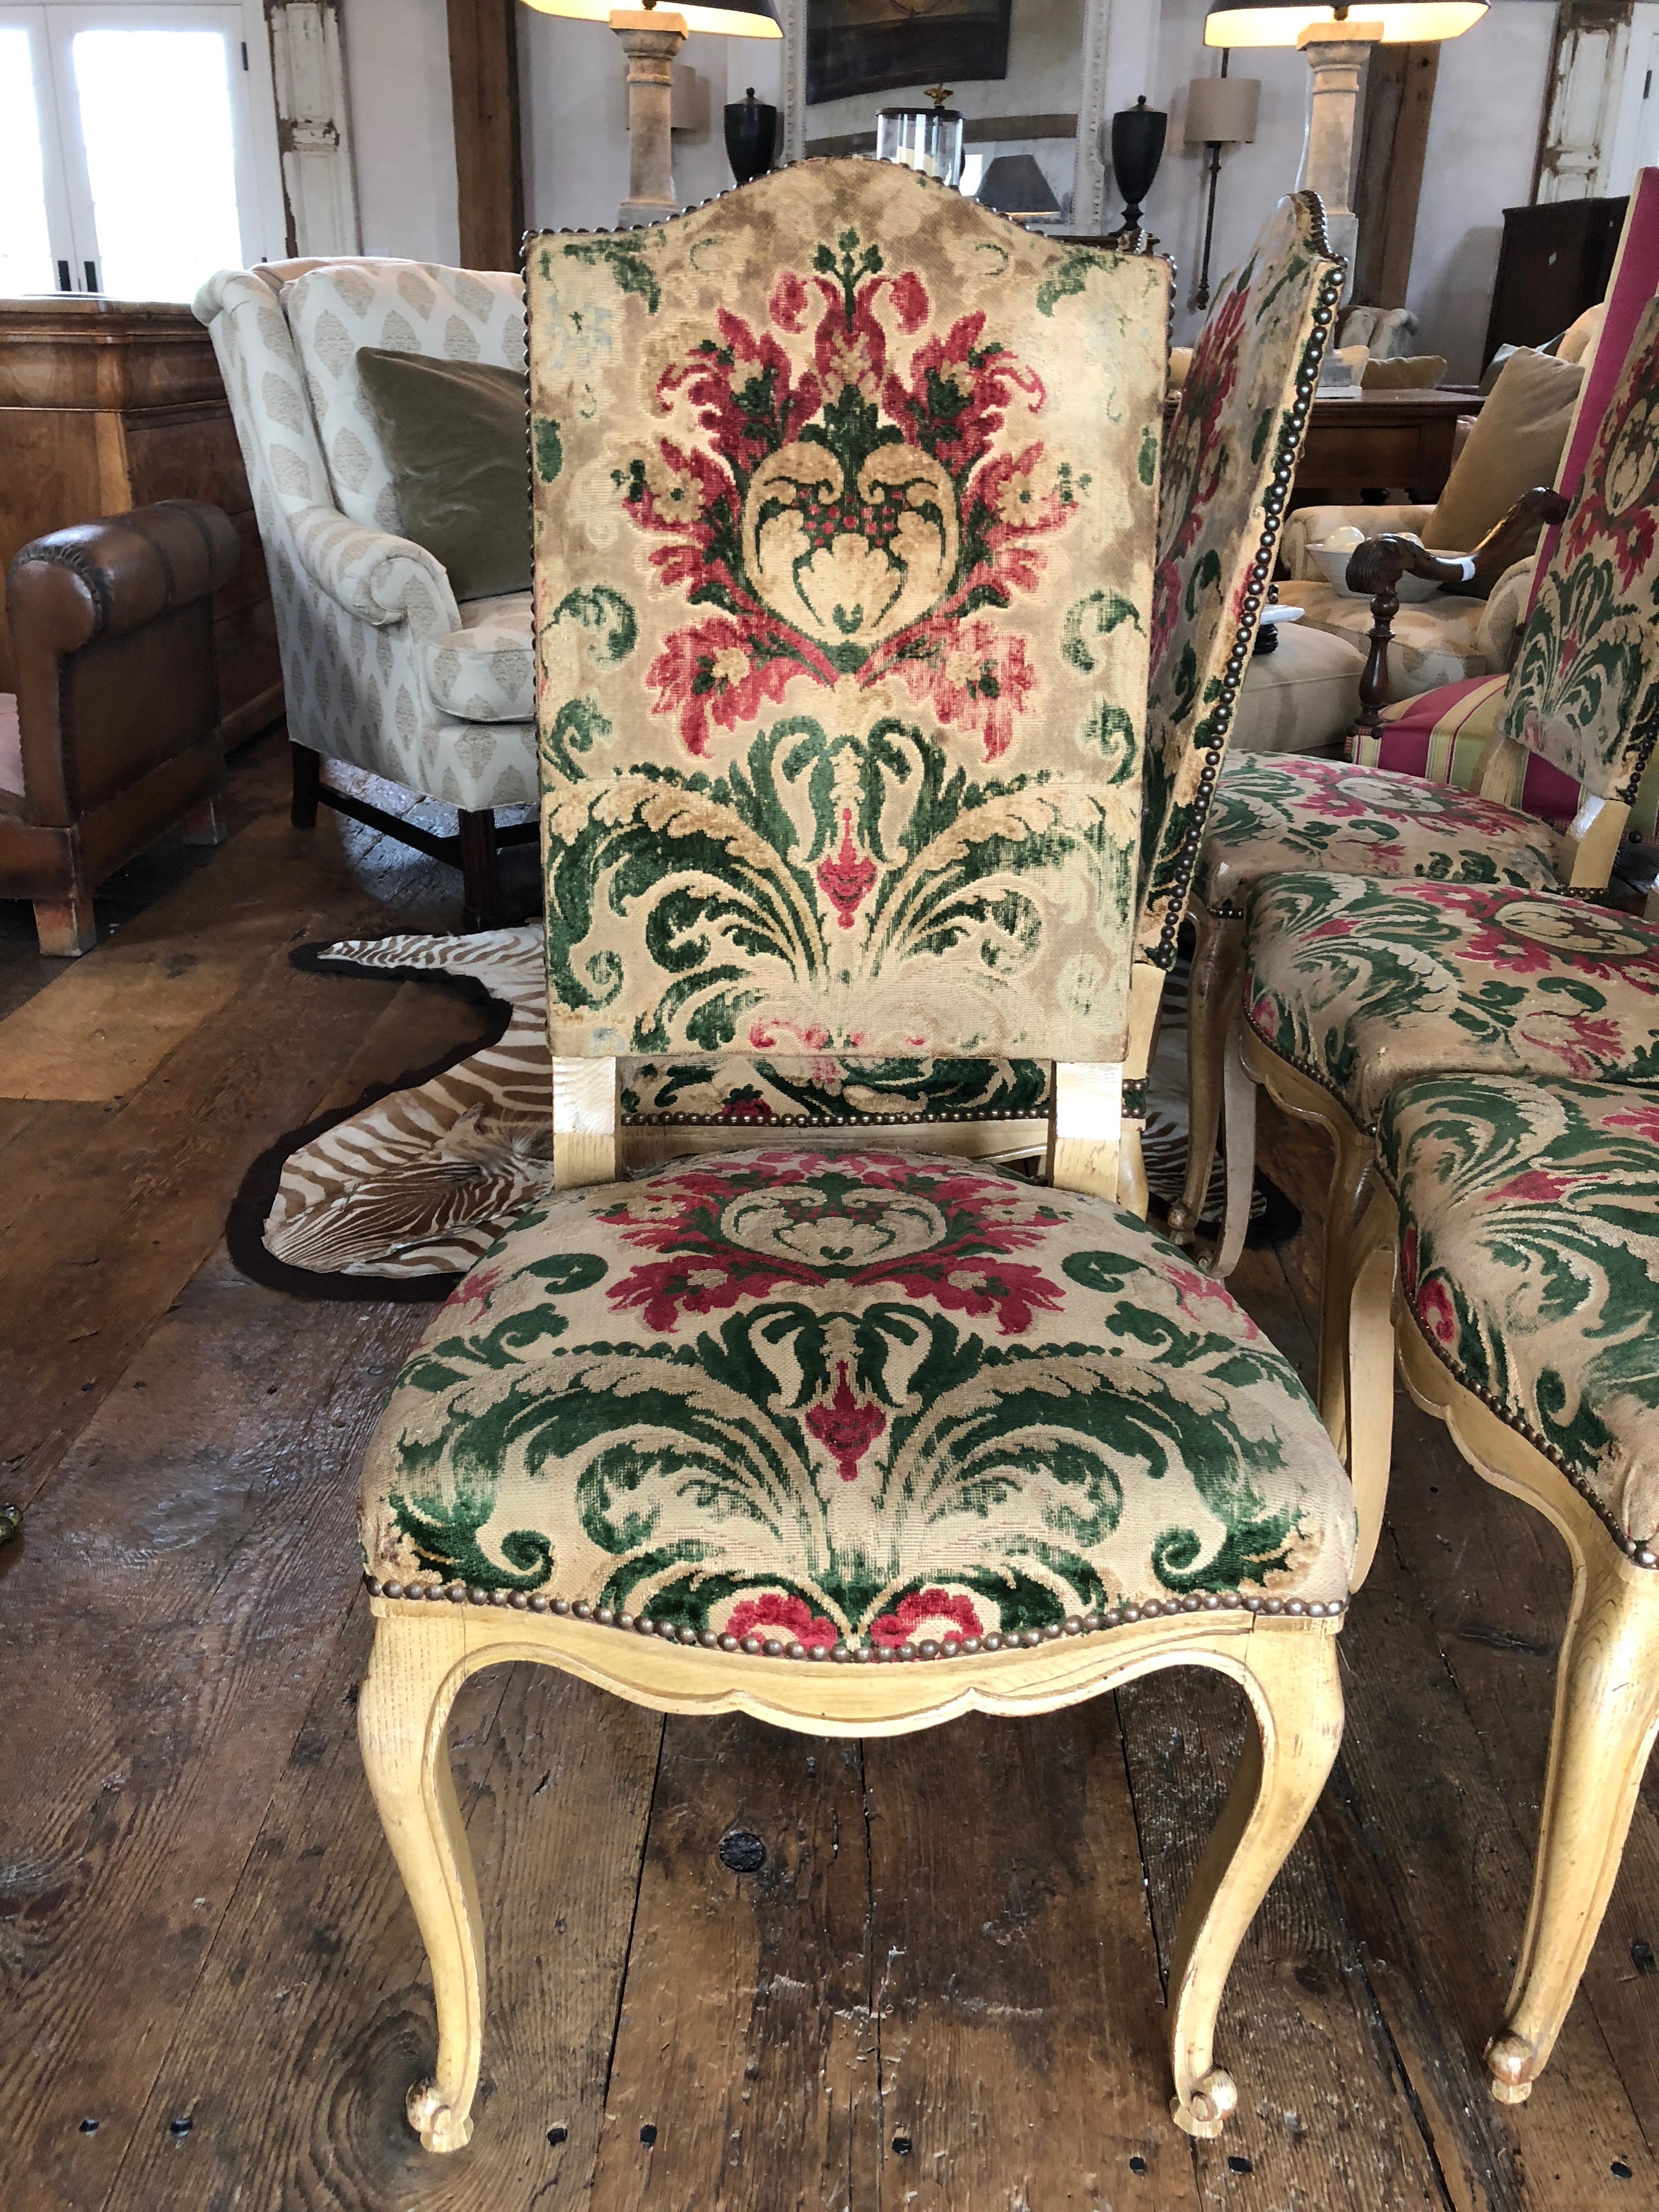 A sumptuous set of six bleached oak and cut velvet Louis XV French chairs with original fabric and paint. Very elegant as well as comfortable. #5004
Measures: Seat depth 18.5.